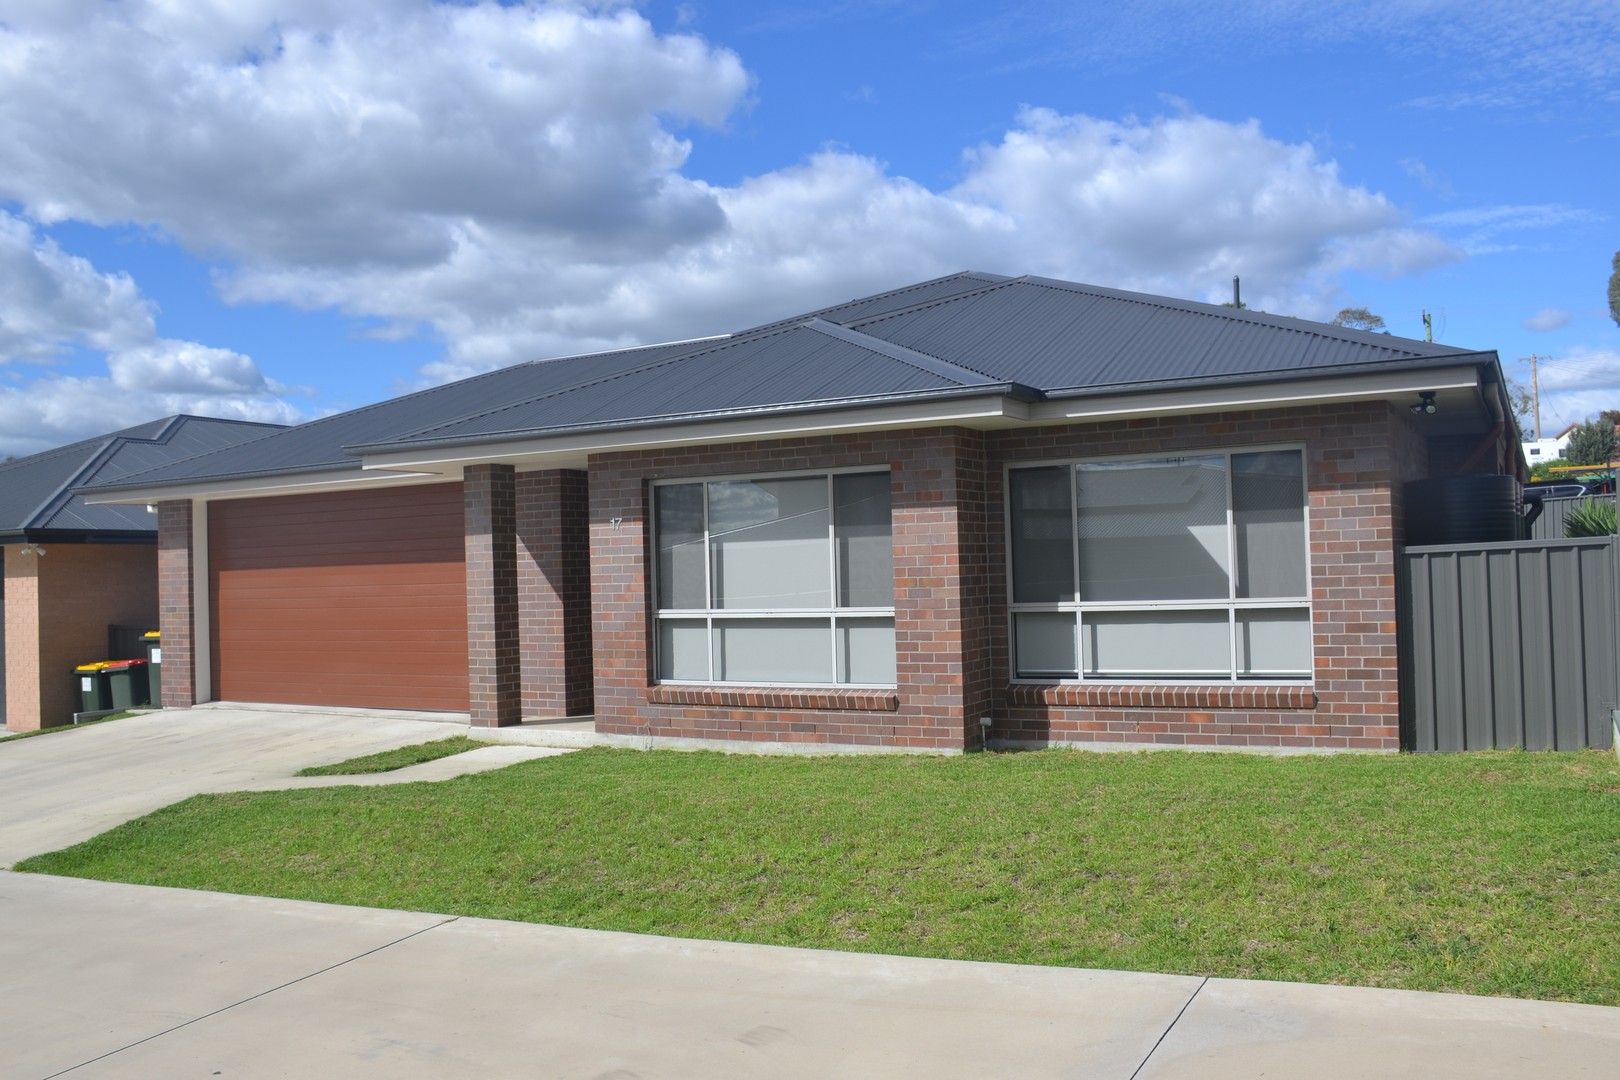 4 bedrooms House in 17/47 Mulligan street INVERELL NSW, 2360